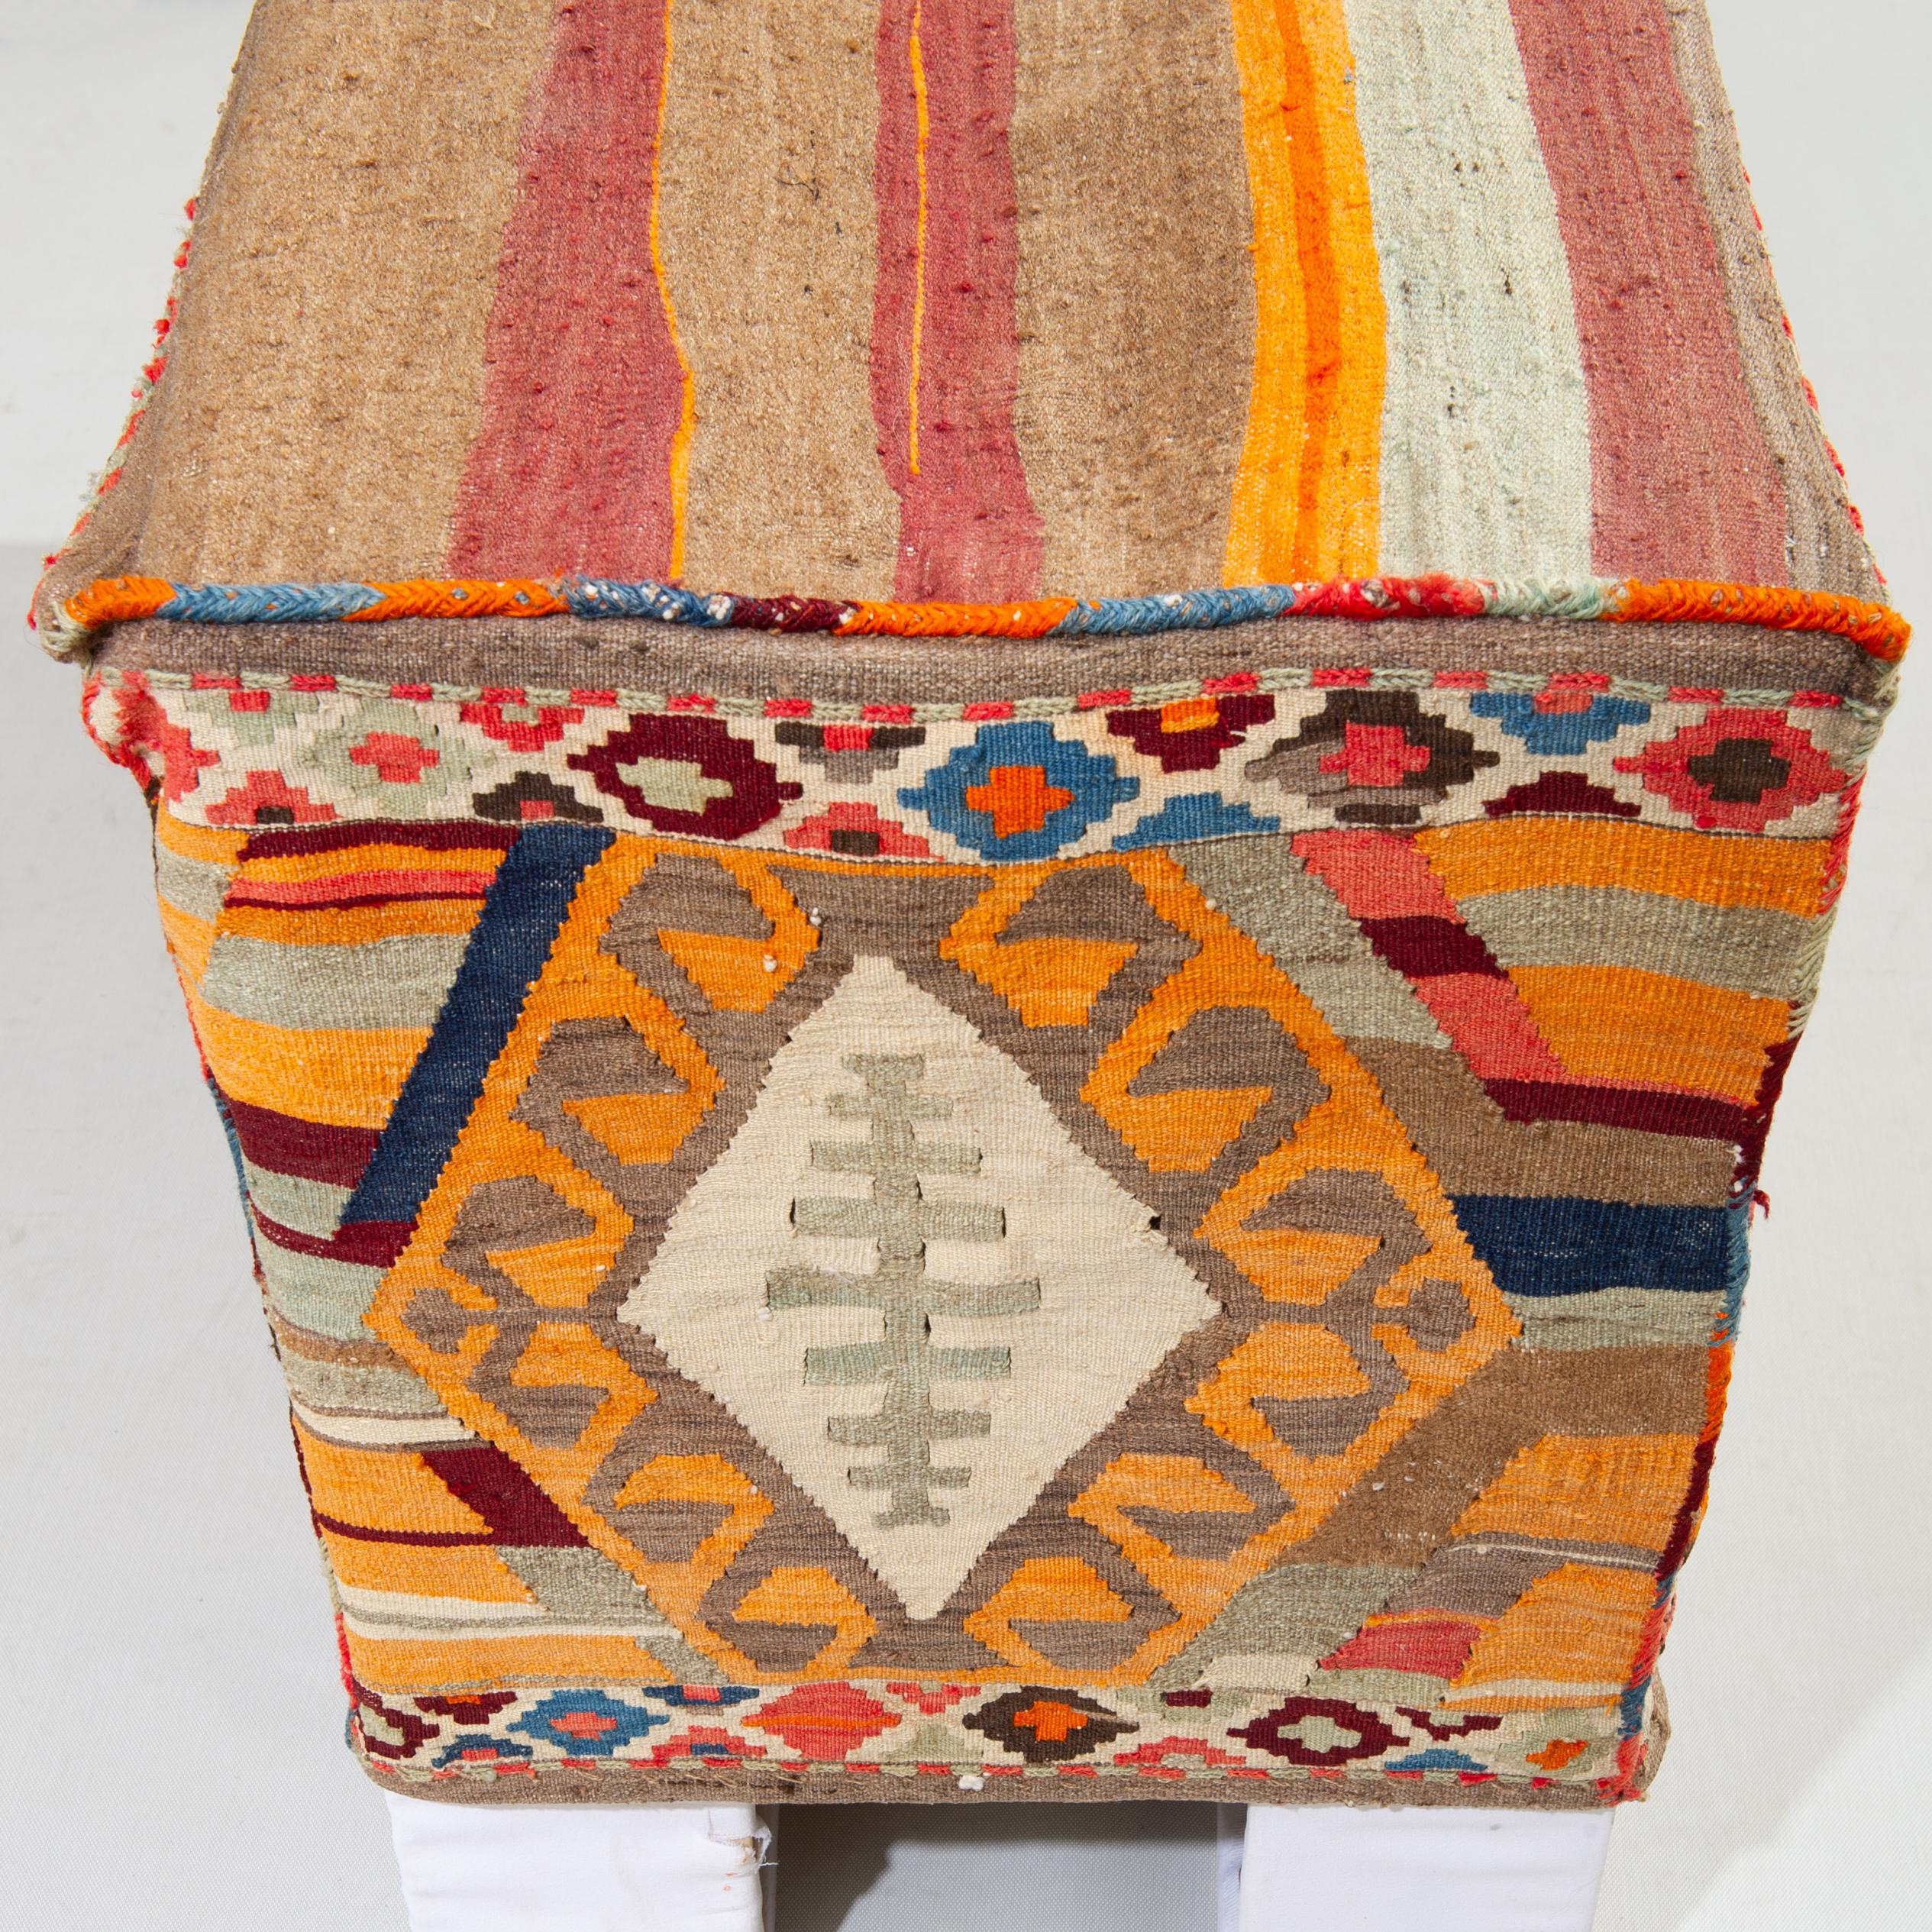 n. 823-824 - Rare pair of antique complete kilim truncks of Shahsavan nomads. 
It is very difficult to find a pair and also find them whole, because Turkish traders take them all apart in order to sell the pieces separately, more interesting for